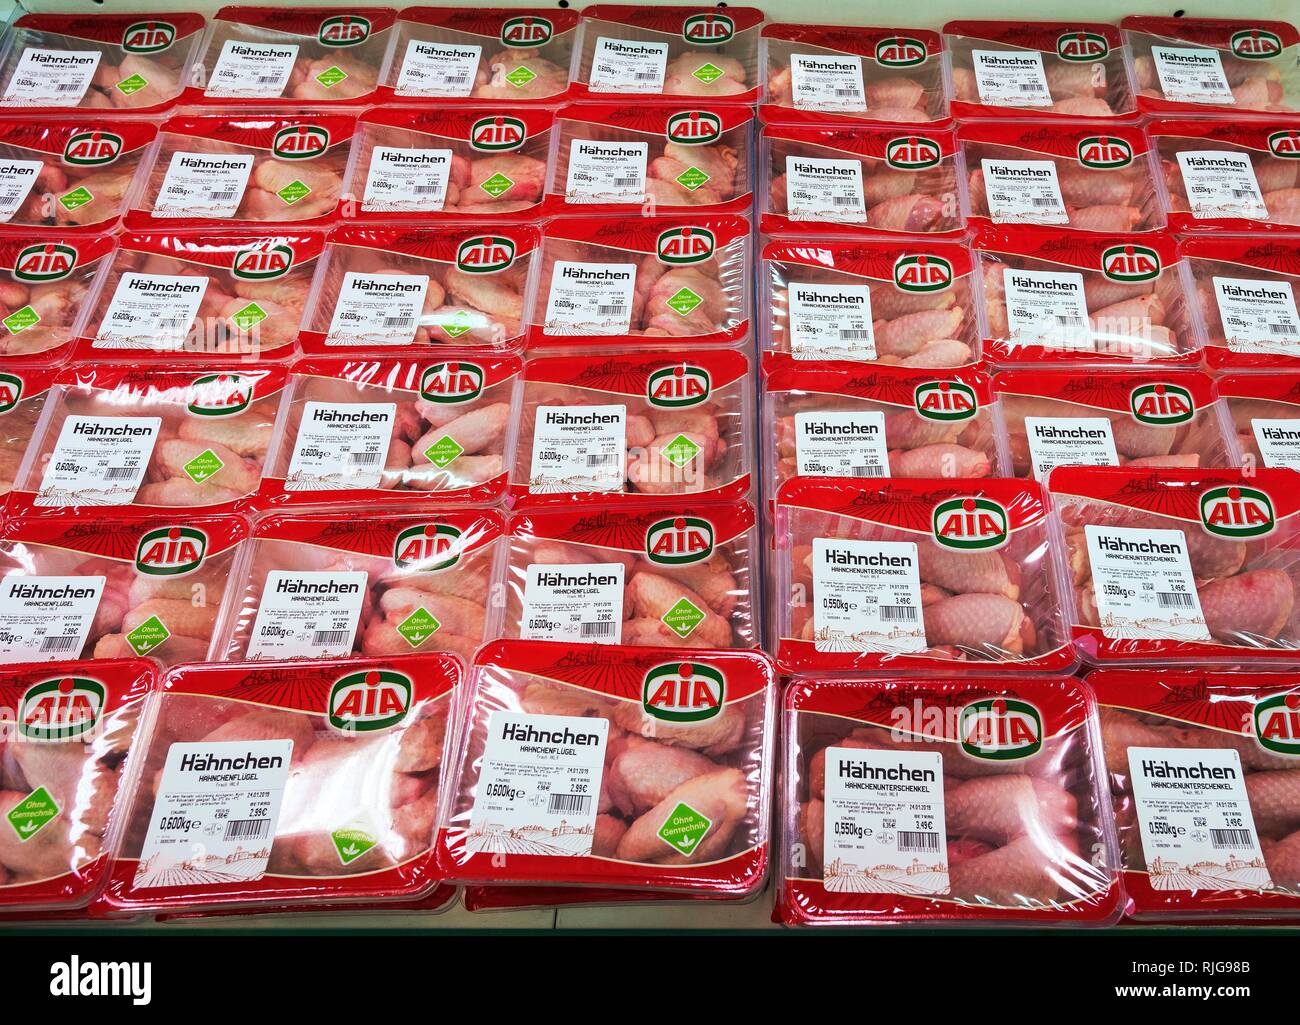 Chicken legs and chicken wings packed in plastic in the supermarket, Munich, Upper Bavaria, Bavaria, Germany Stock Photo